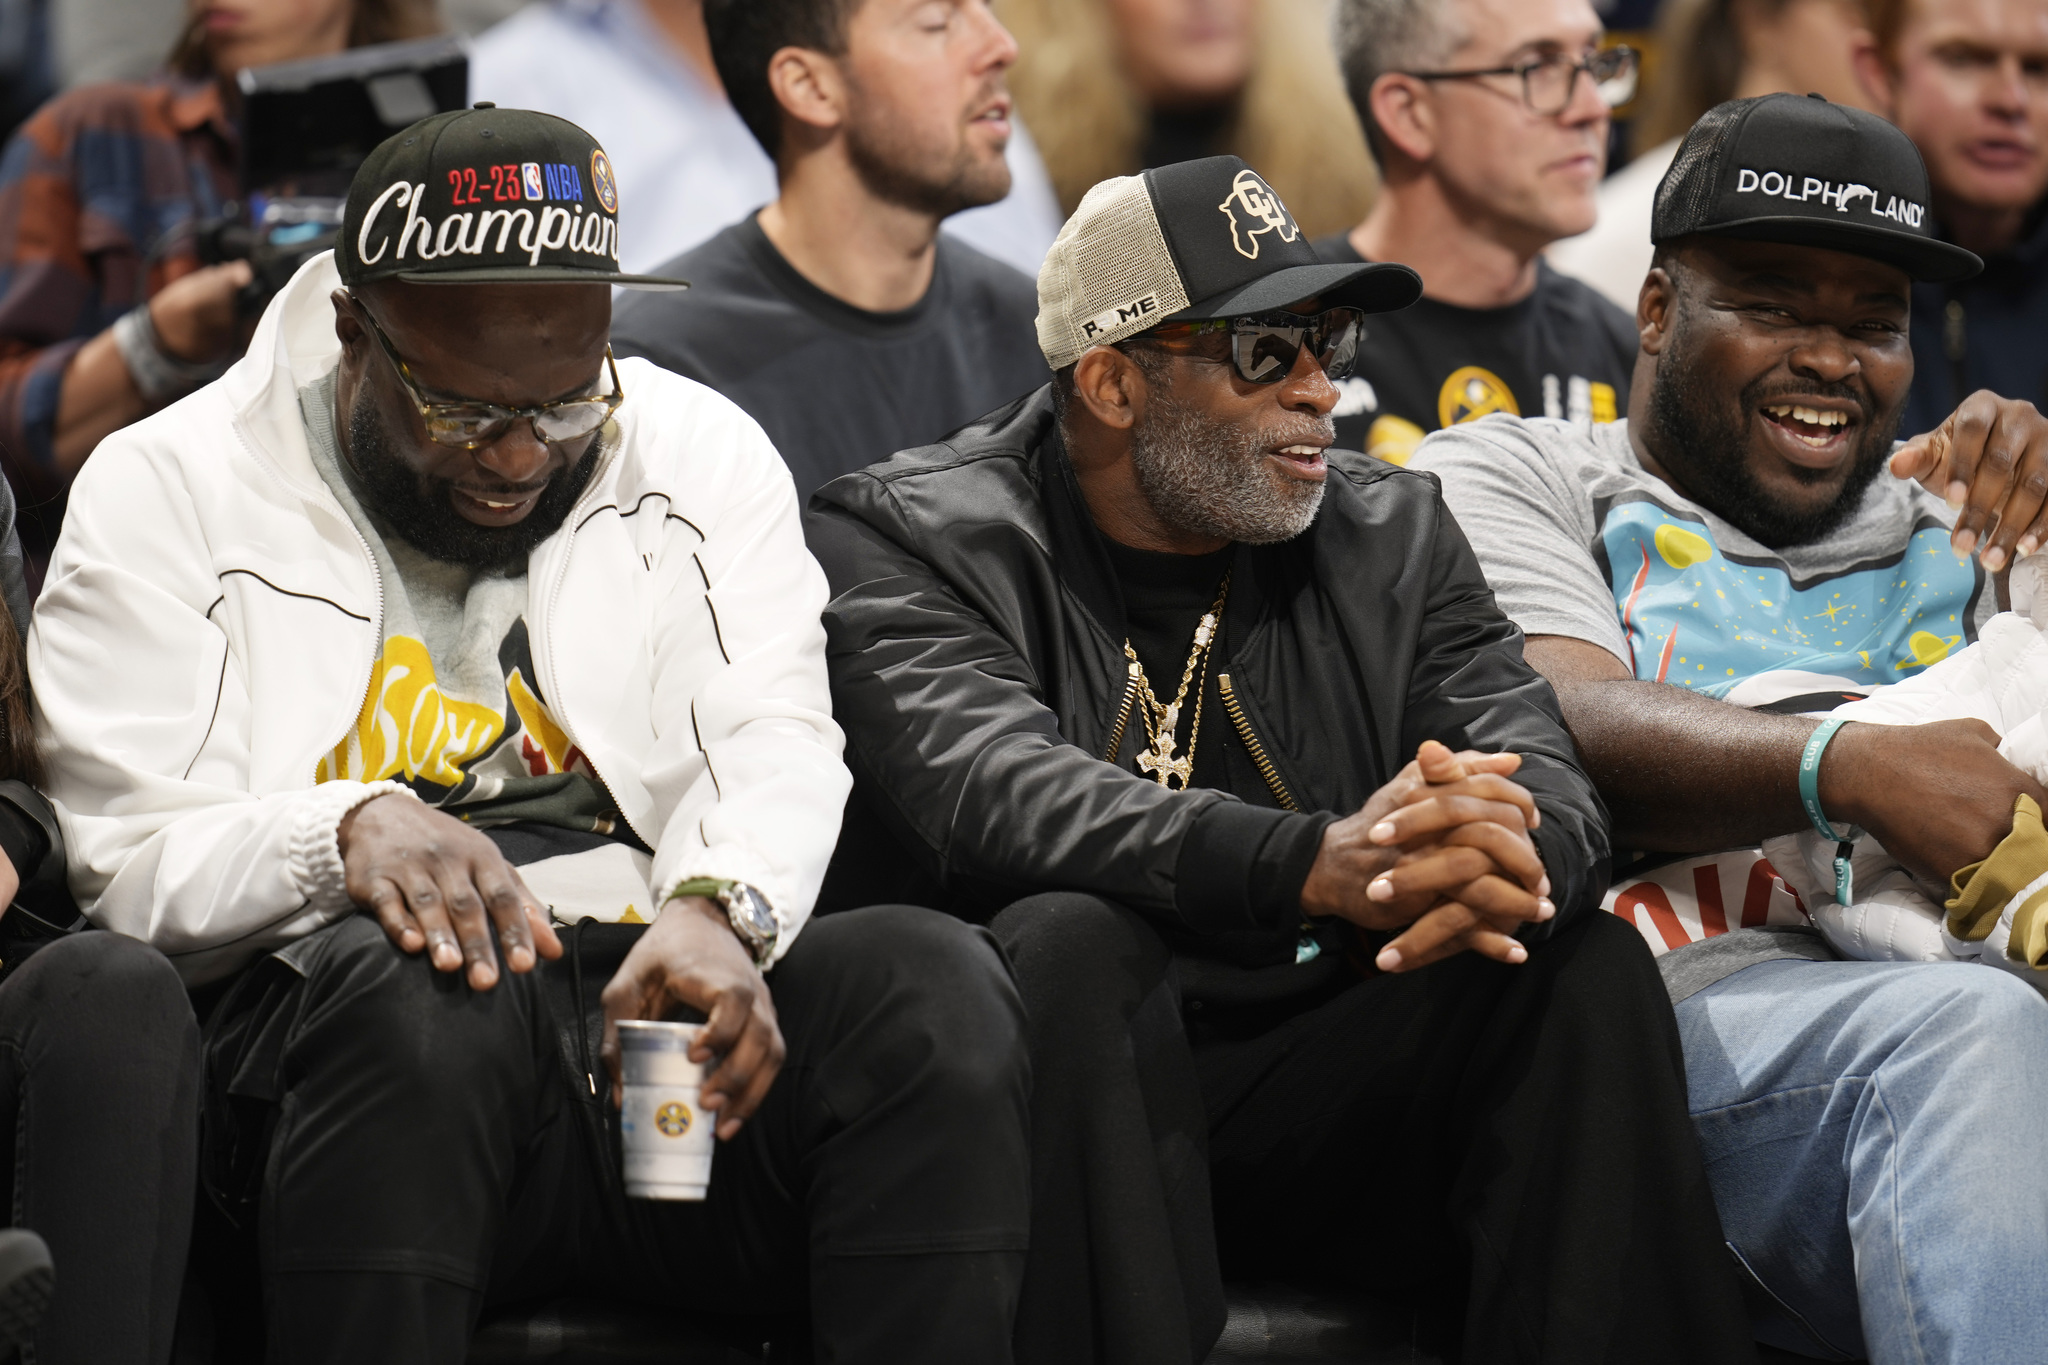 Colorado football coach Deion Sanders (center) was courtside to watch the Nuggets take on the Lakers.